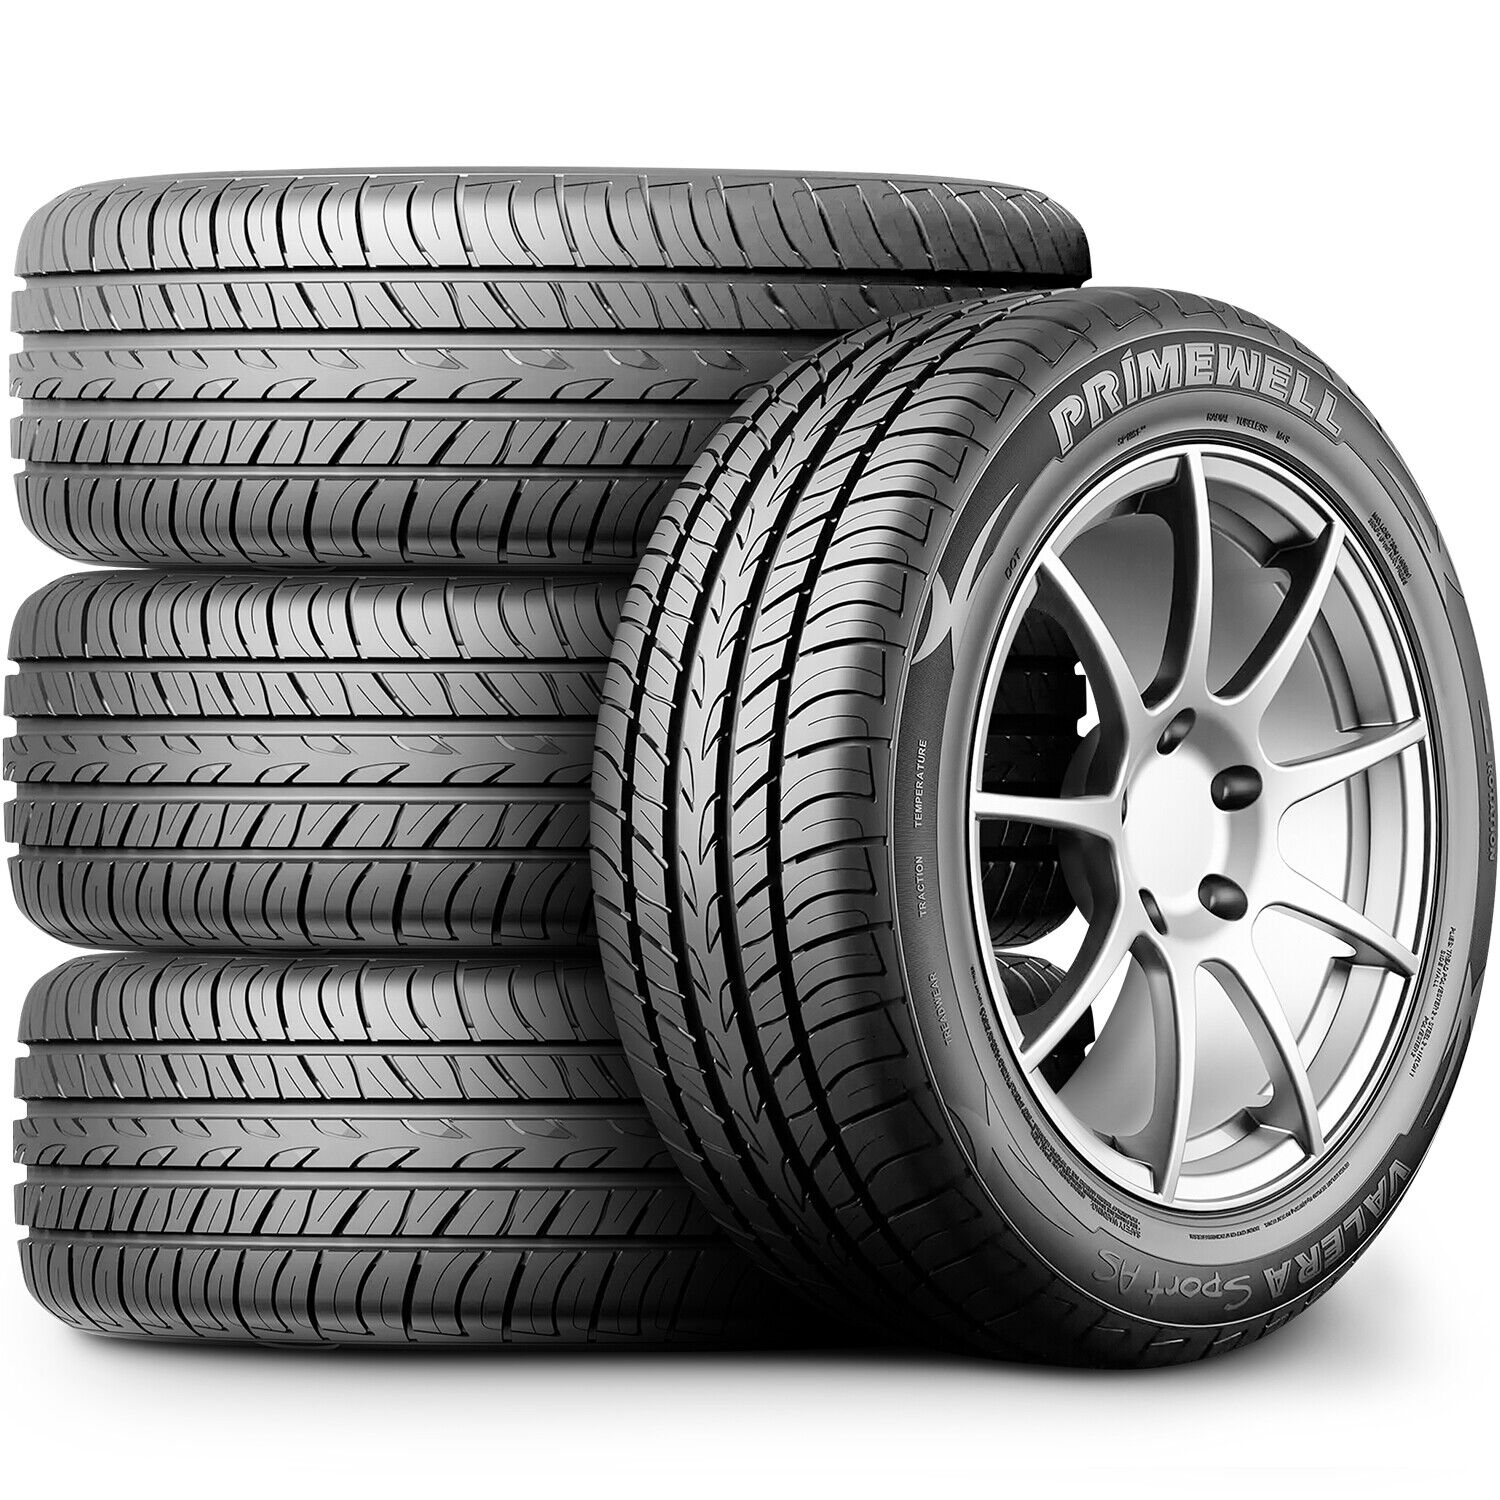 4 Tires Primewell Valera Sport AS 225/45ZR18 225/45R18 91W A/S High Performance